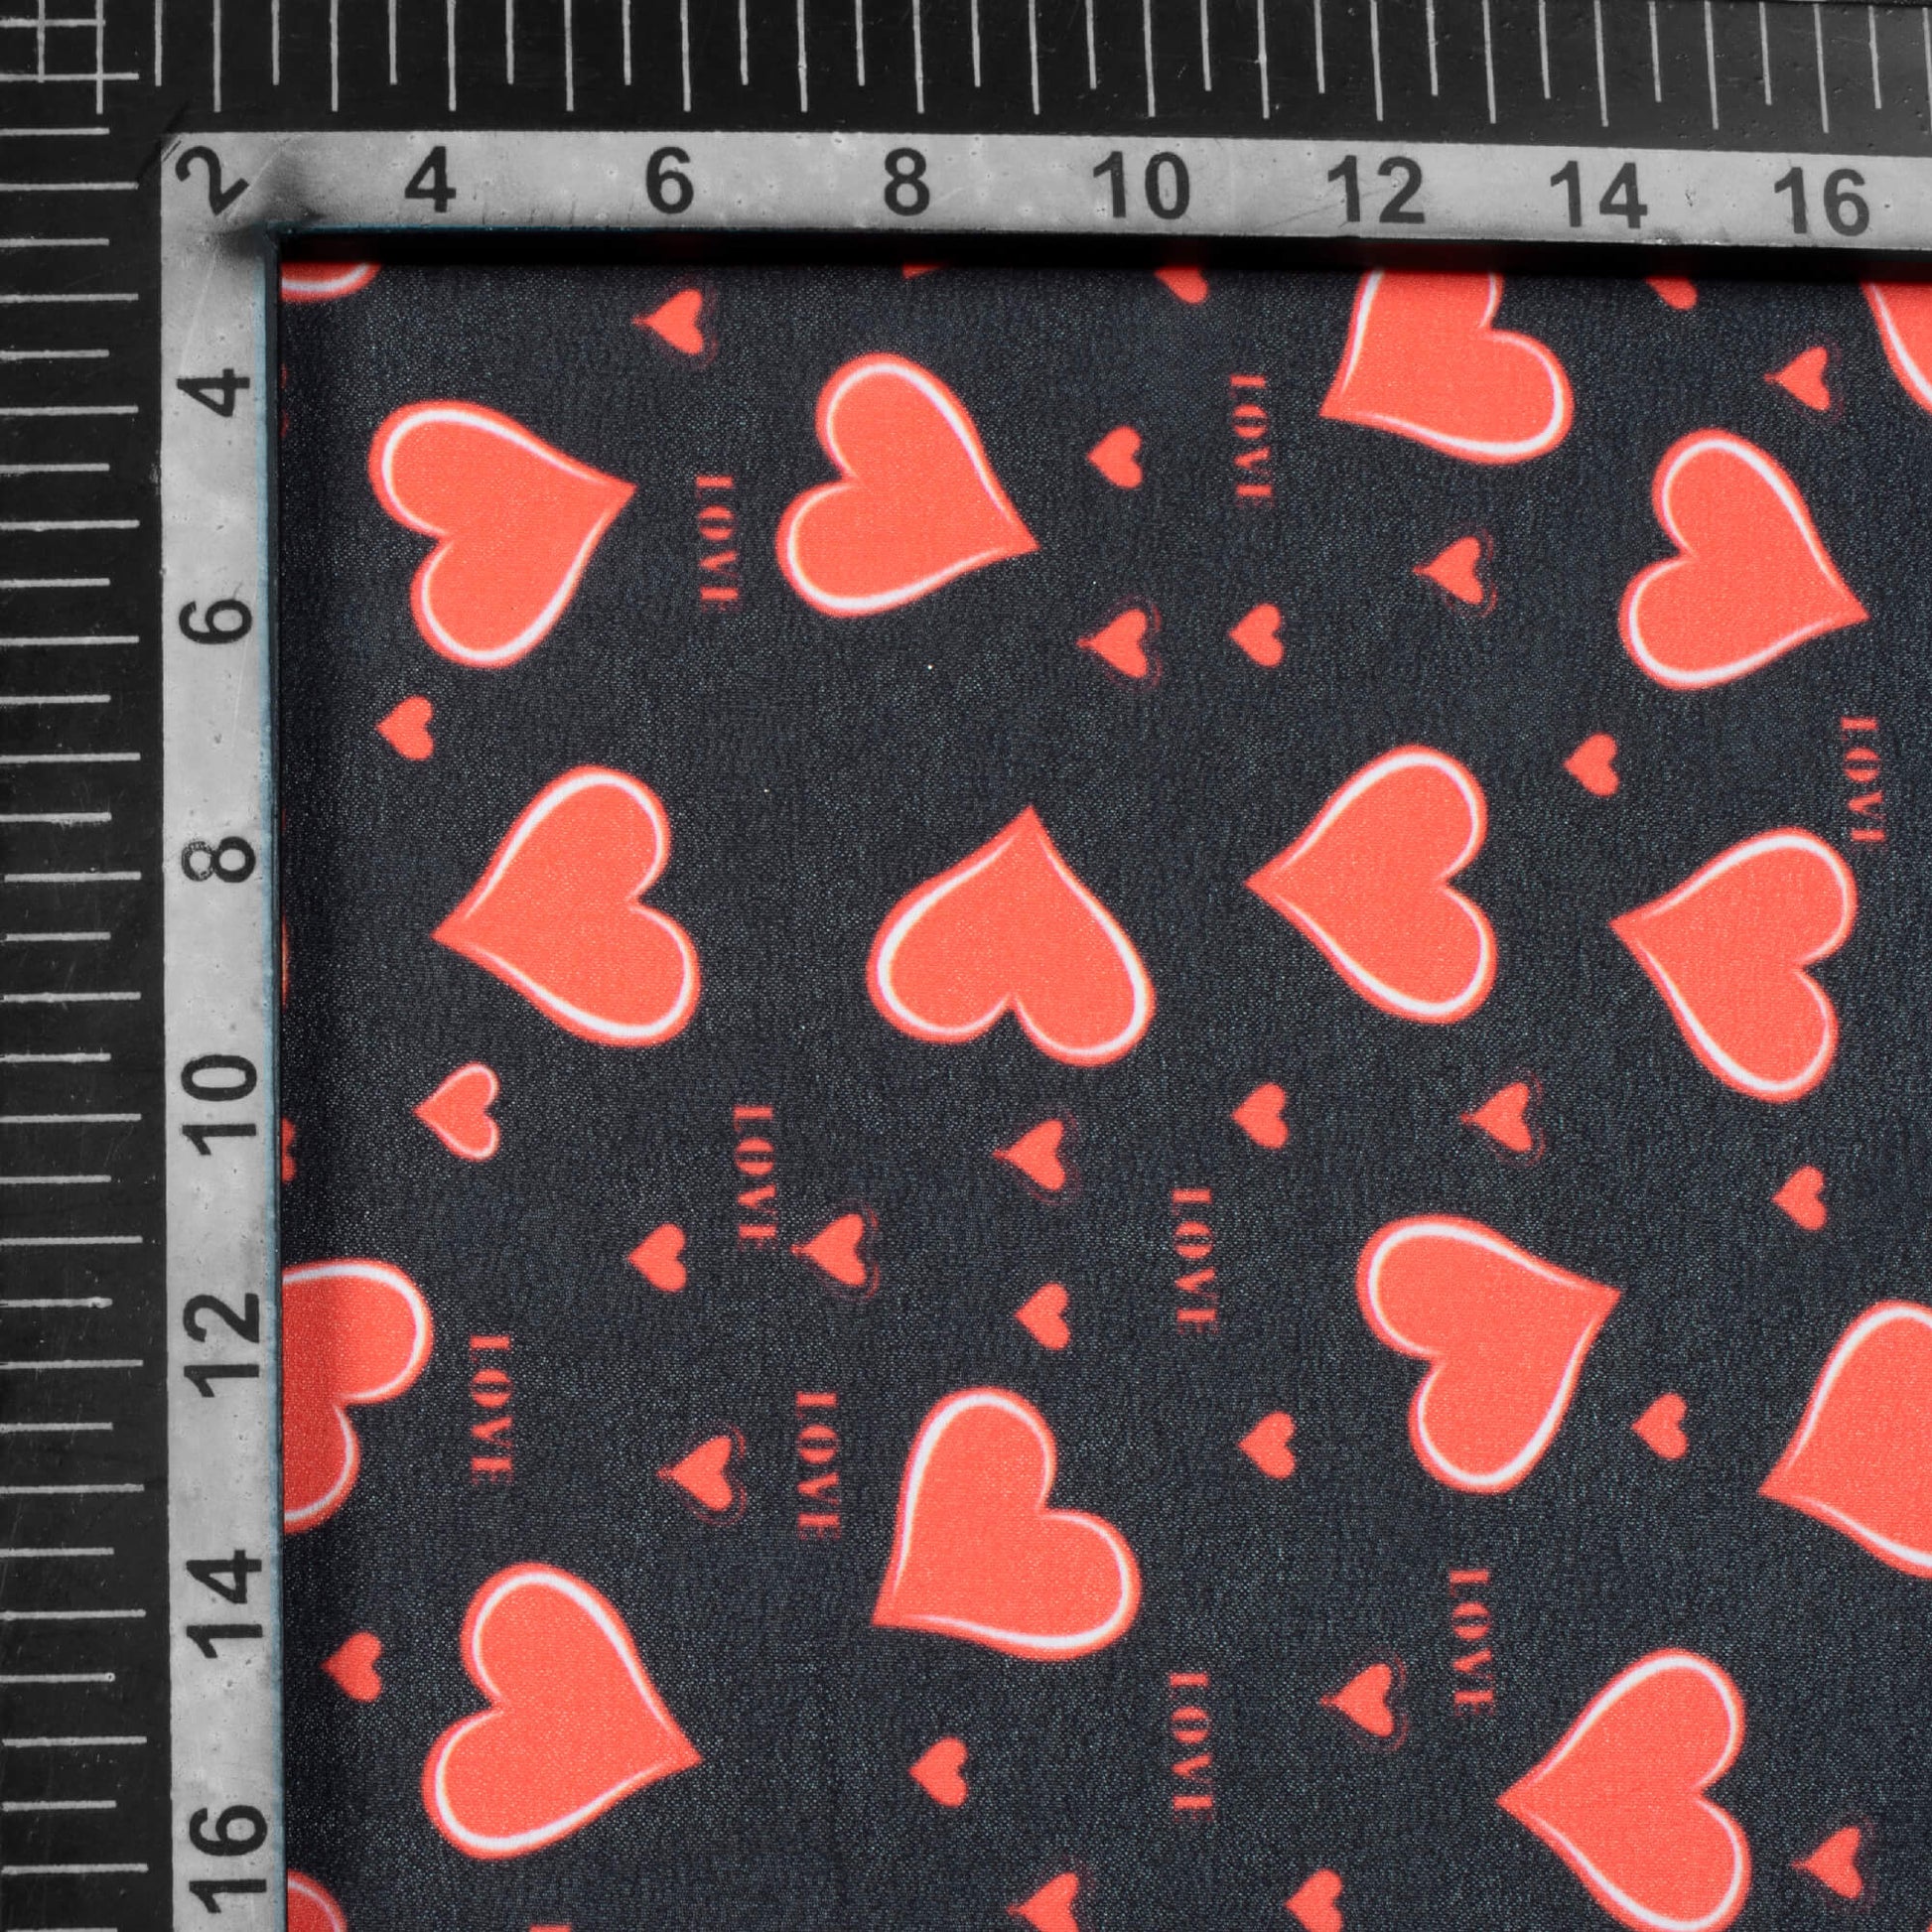 Black And Red Heart Pattern Digital Print Georgette Fabric - Fabcurate